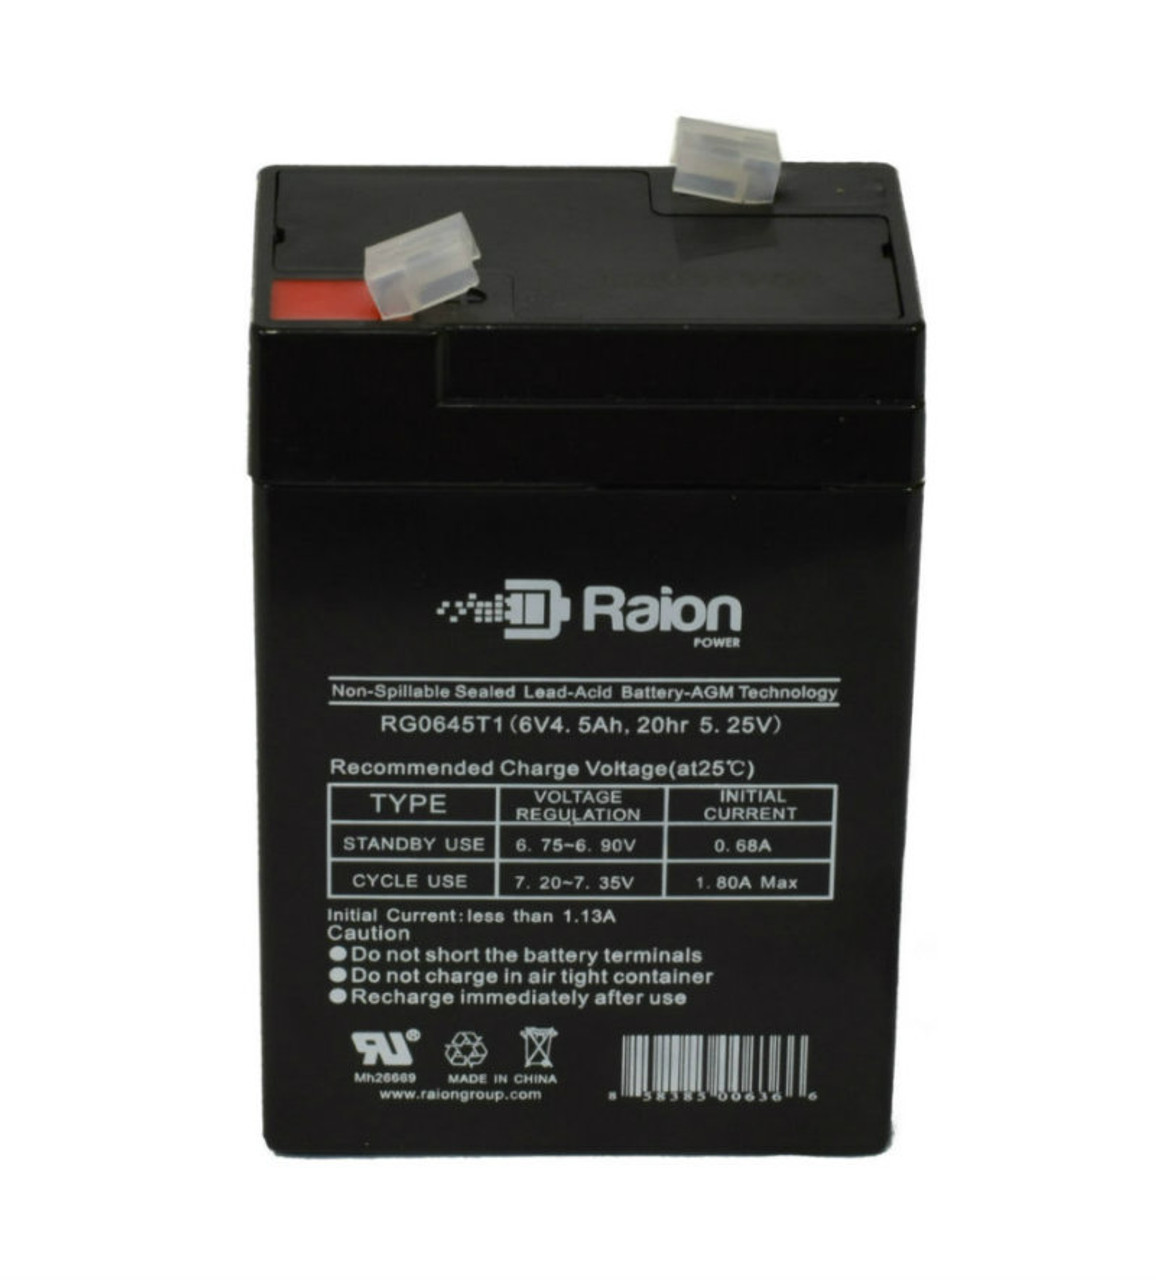 Raion Power RG0645T1 Replacement Battery Cartridge for Alaris Medical 4410 Vital Check Monitor